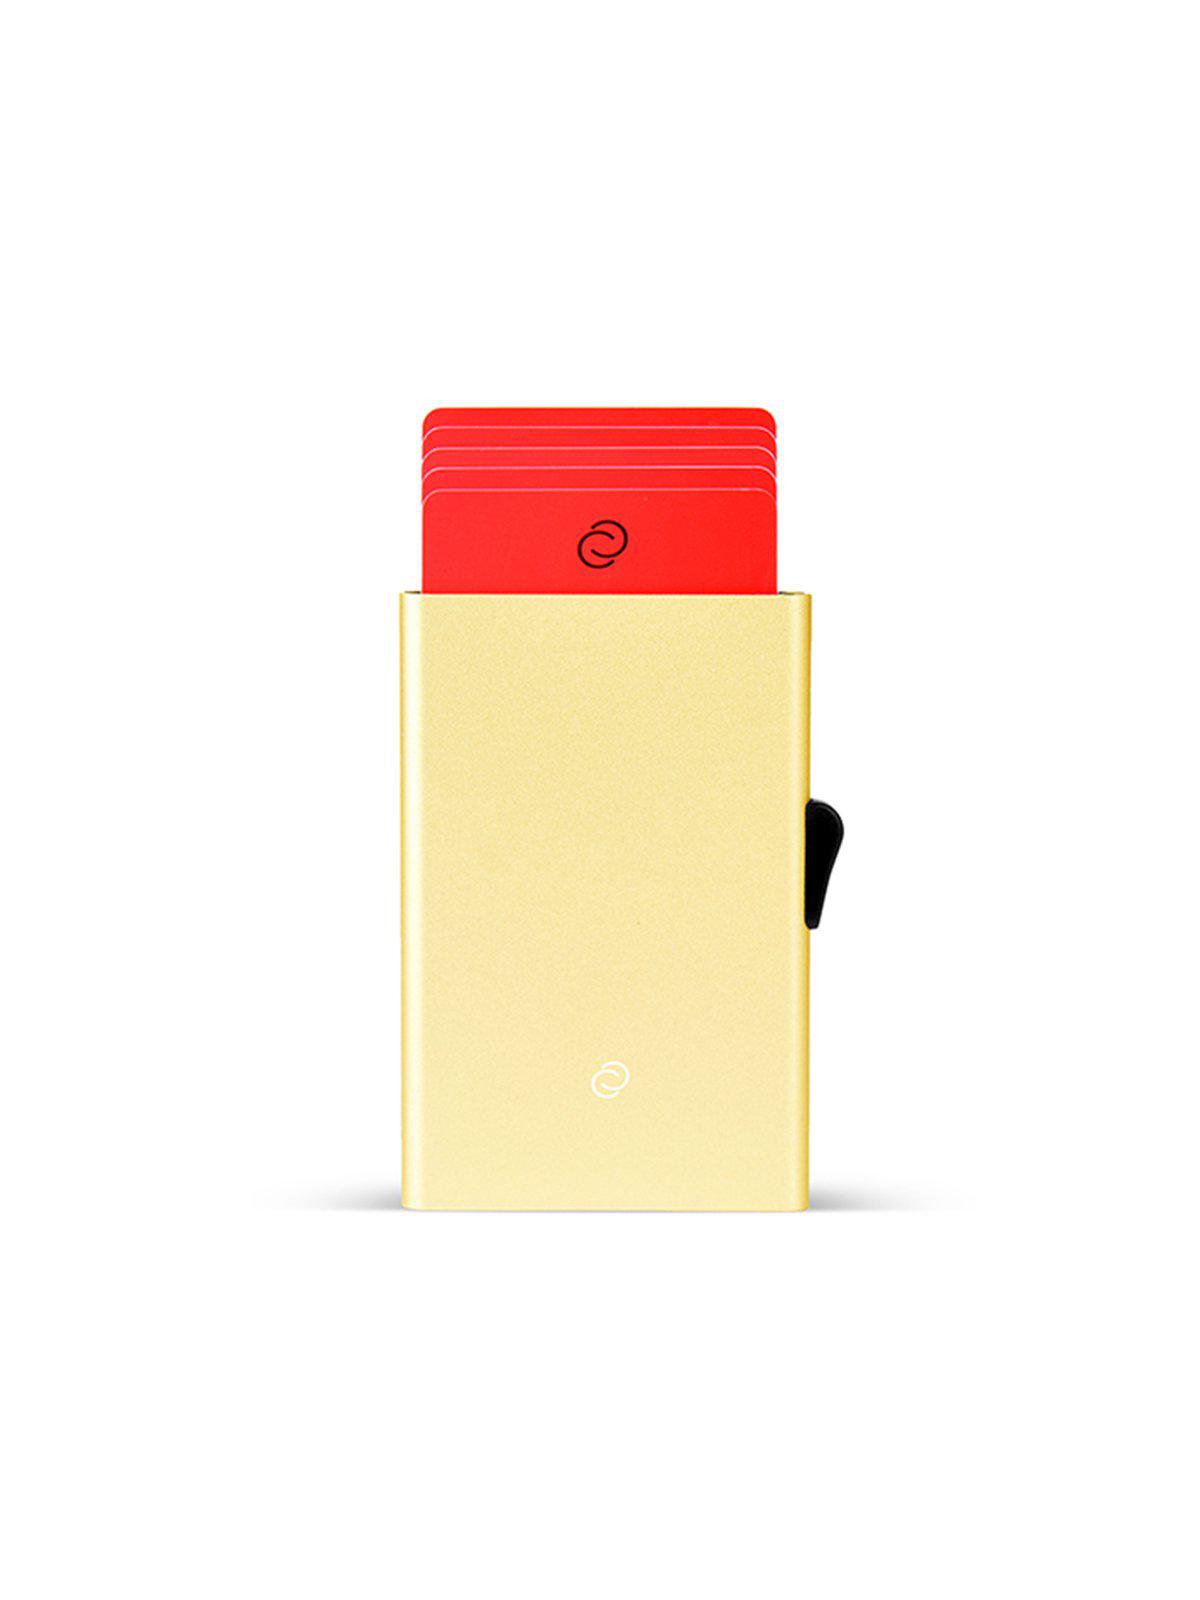 C-Secure Aluminium RFID Cardholder Champagne Gold - MORE by Morello Indonesia